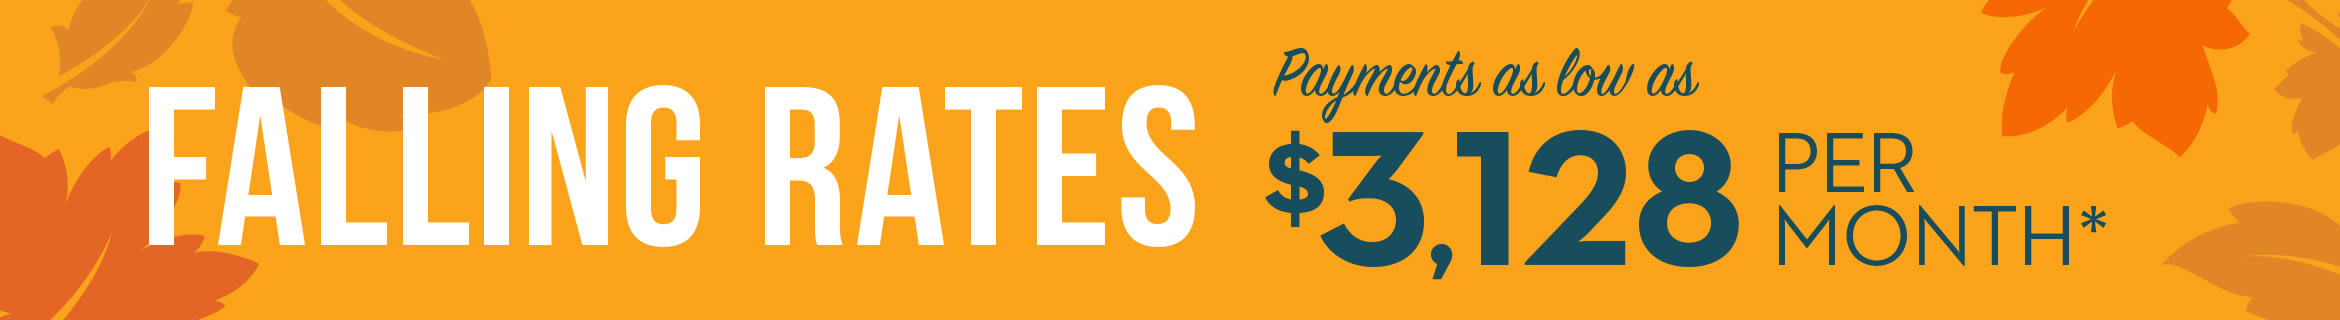 Falling Rates - Payments as low as $3,128 Per Month*